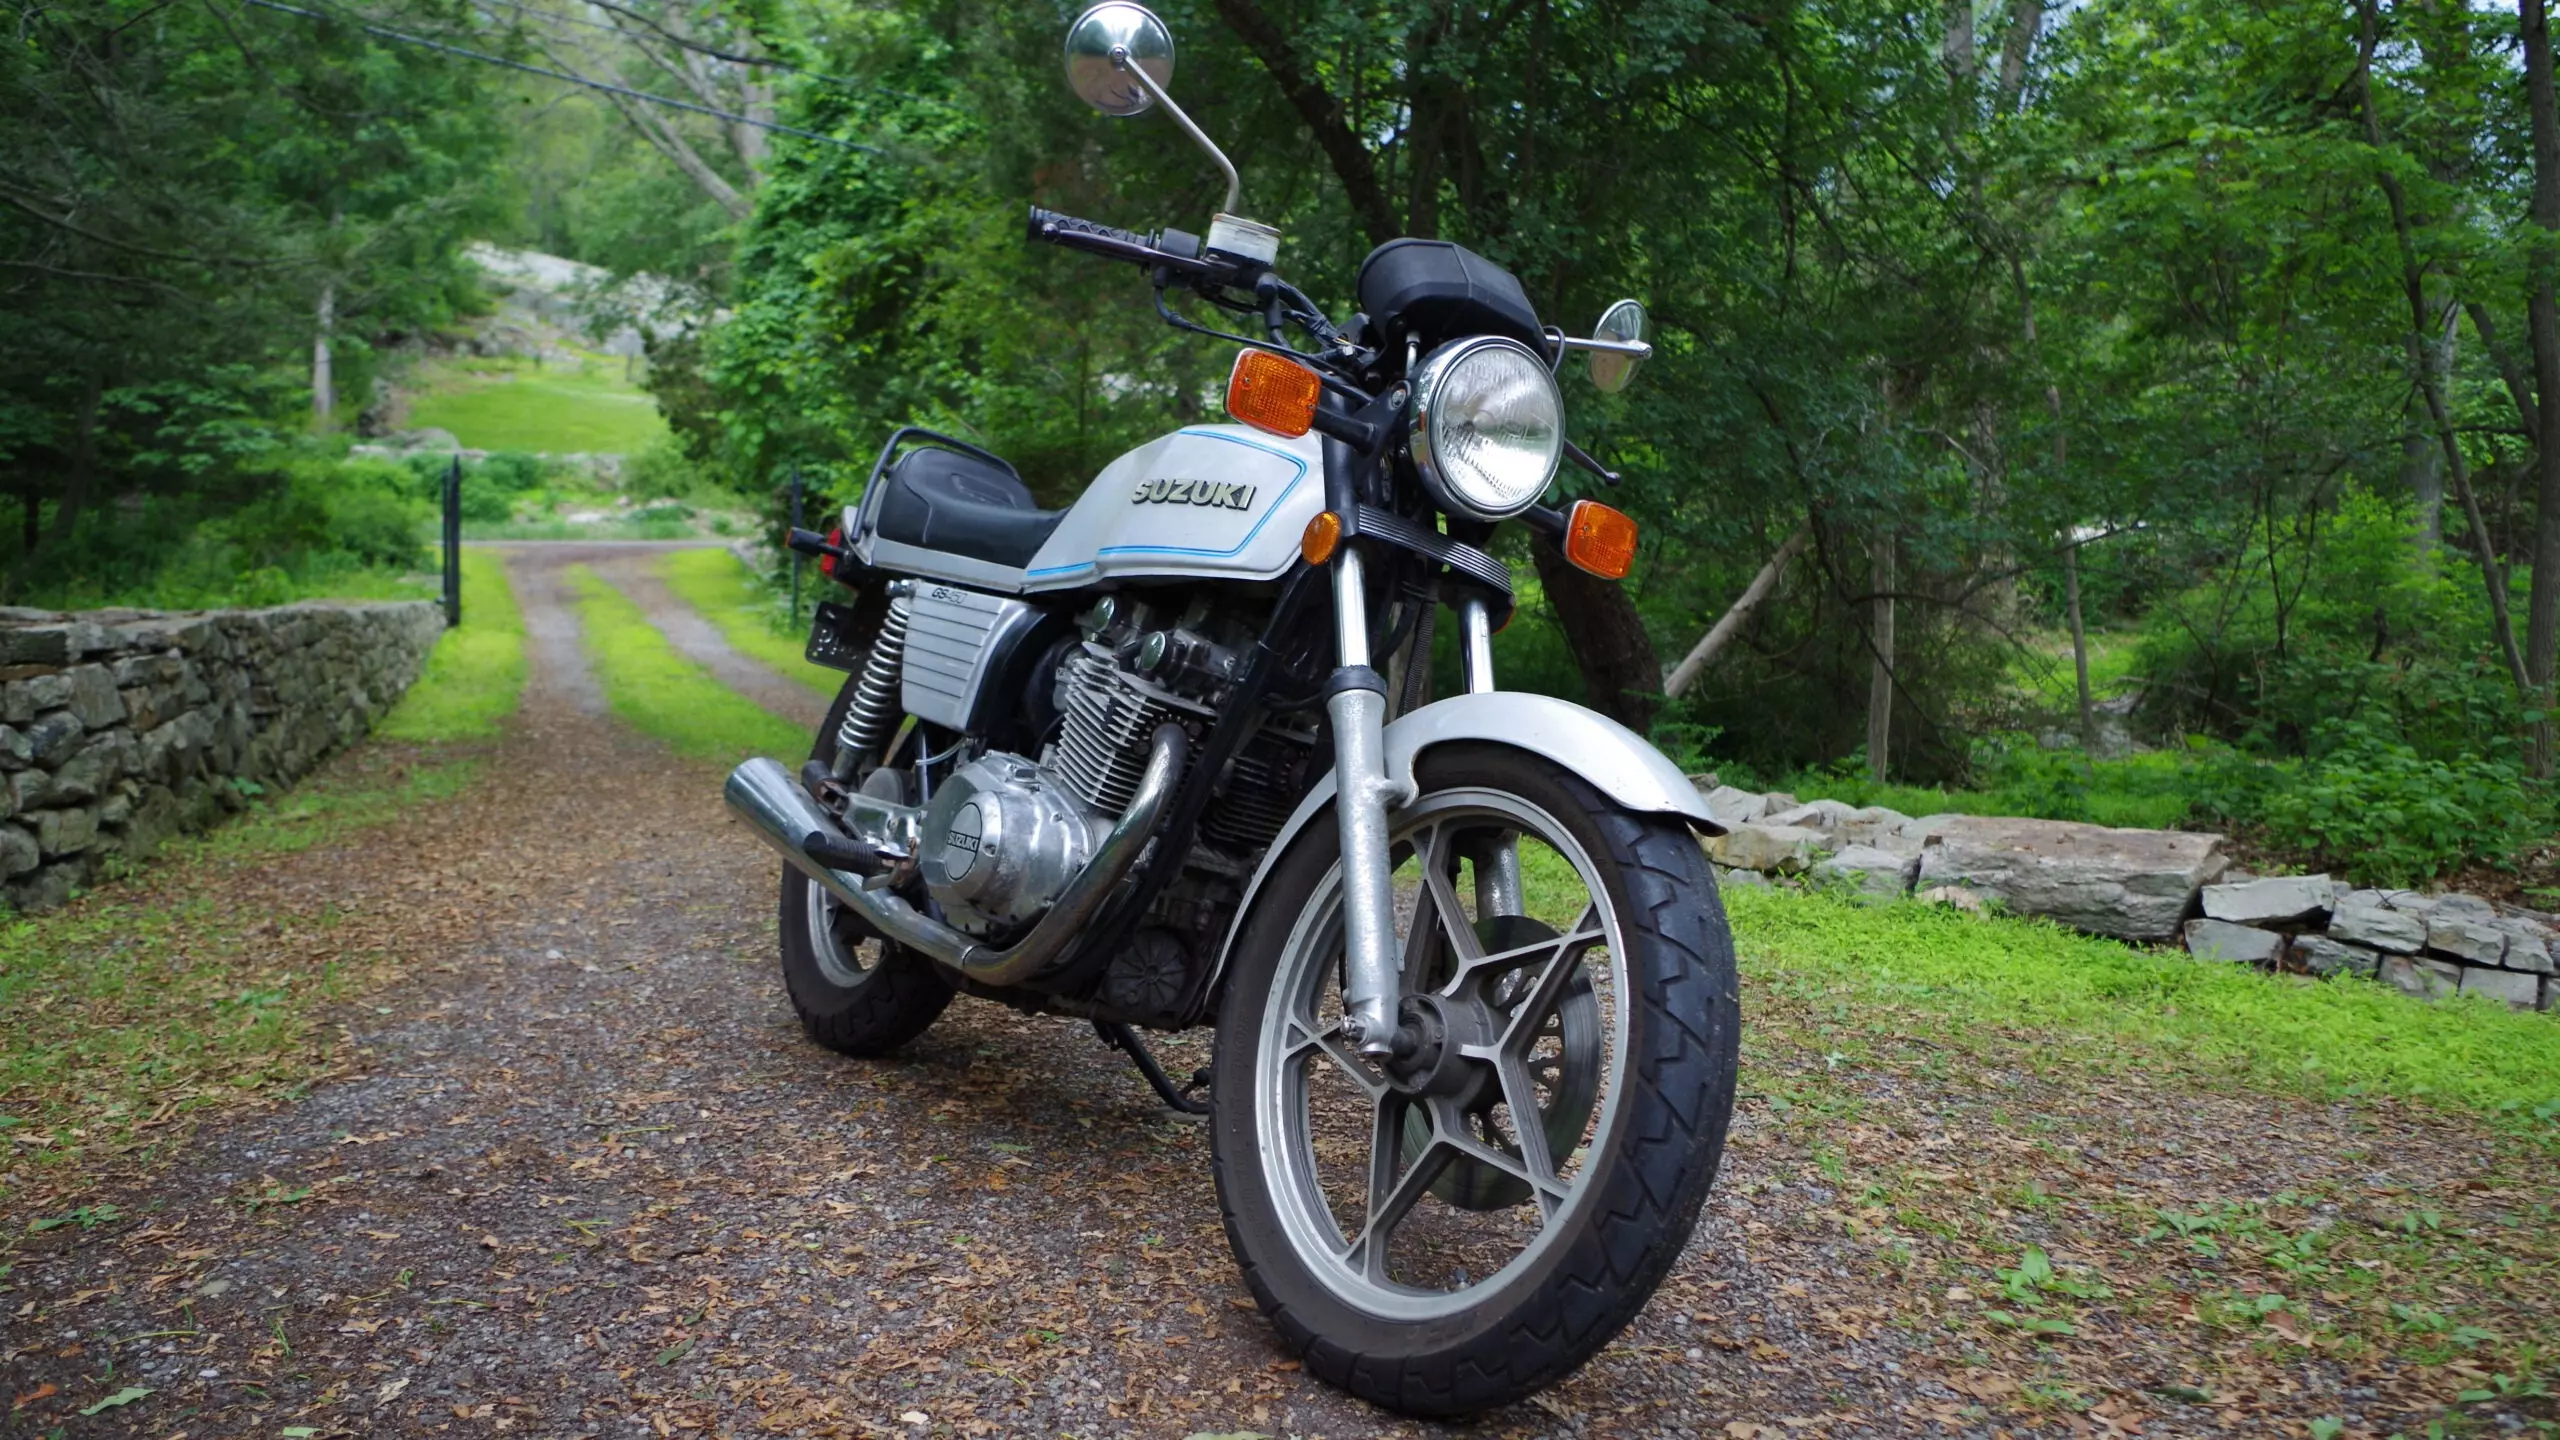 Everybody Should Experience the Joy of a Universal Japanese Motorcycle